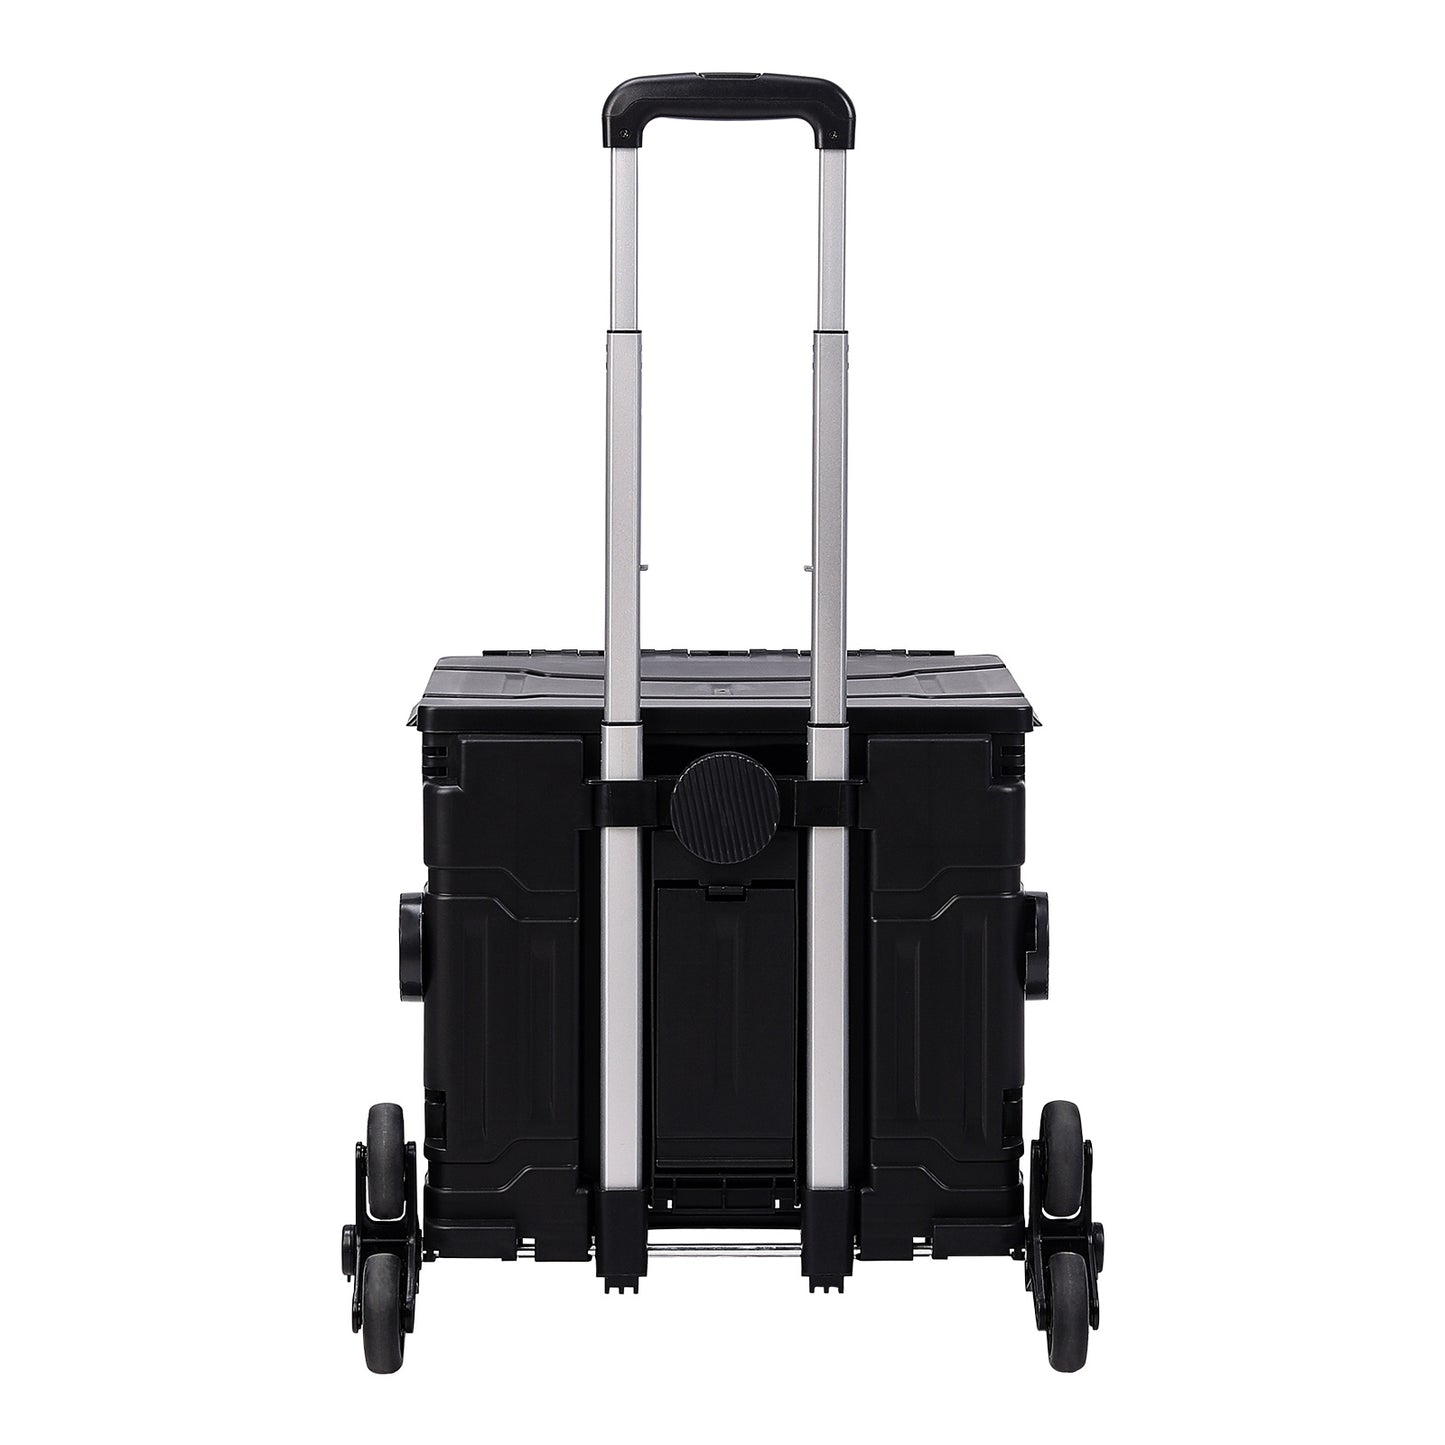 Black 50L Collapsible Rolling Utility Crate Shopping Cart with 8 Wheels